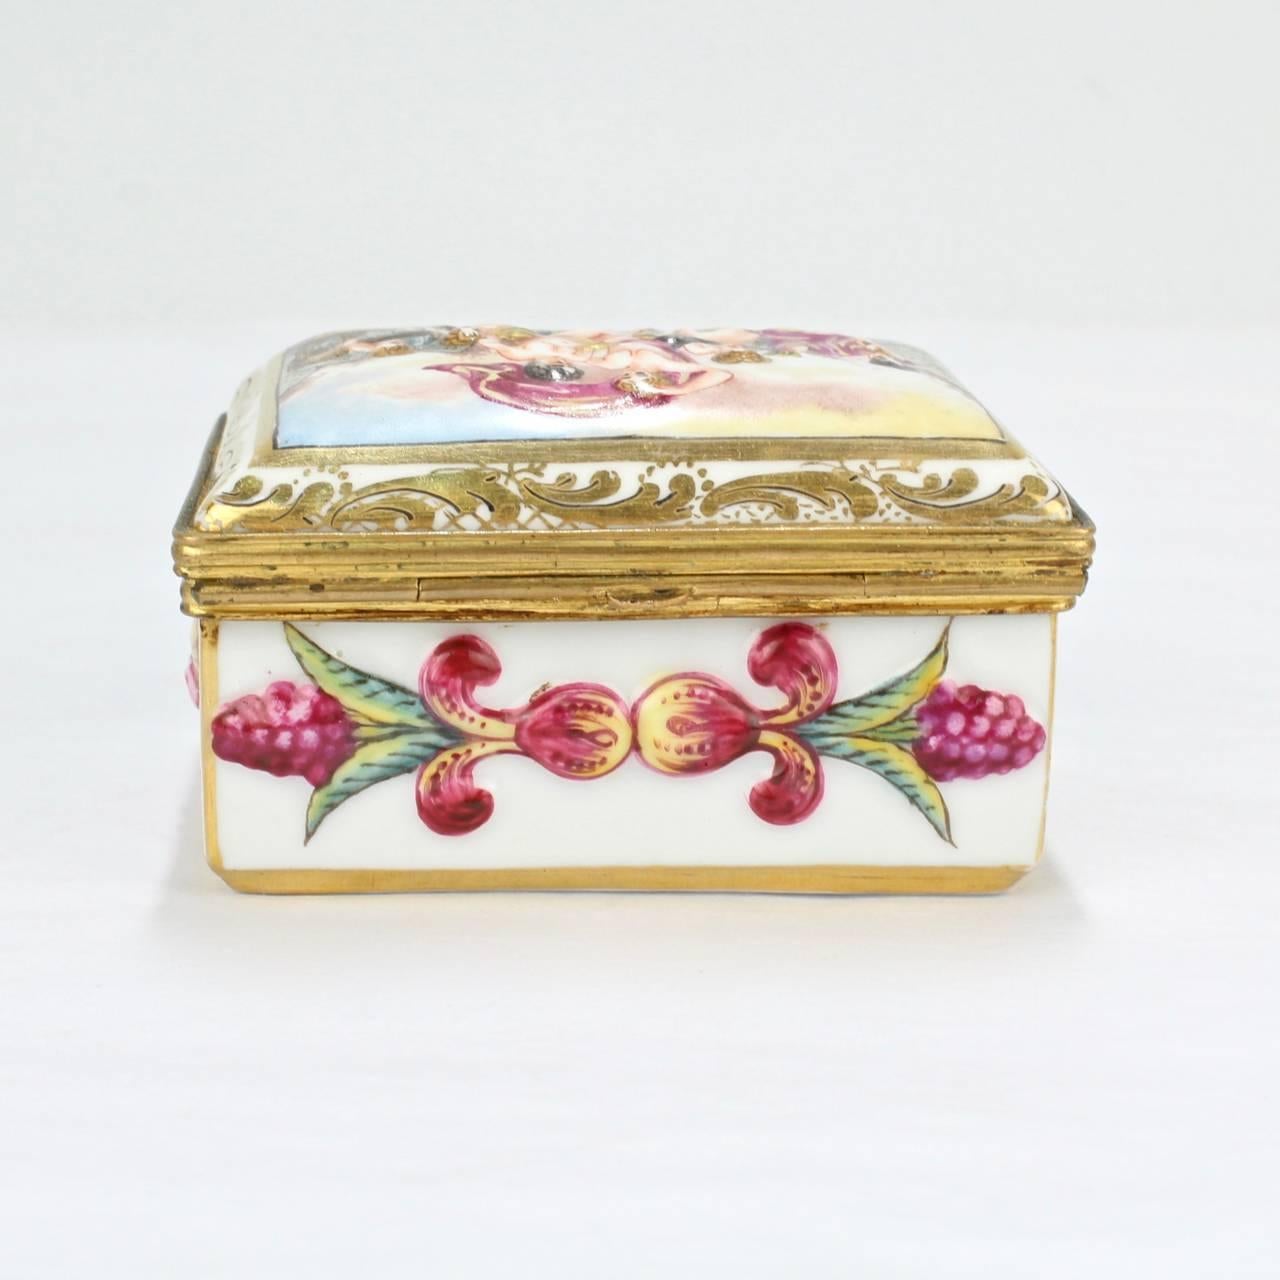 Antique Capodimonte Porcelain Table Snuff or Dresser Box In Good Condition For Sale In Philadelphia, PA